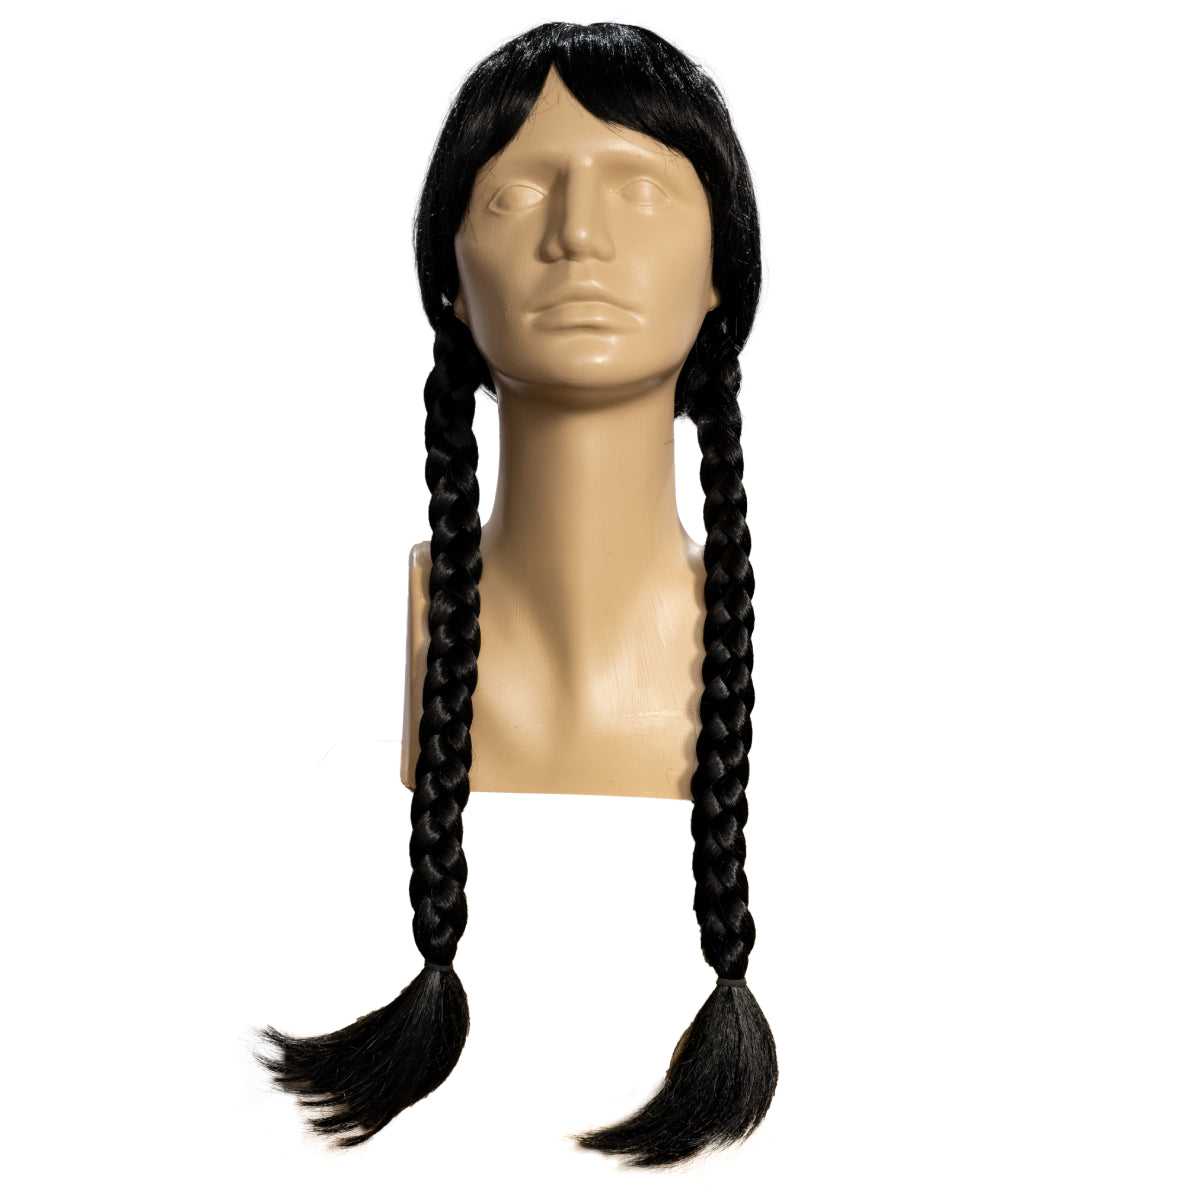 Wednesday Addams Long Braided Black Hair Wig for Halloween Costume Cosplay Accessory